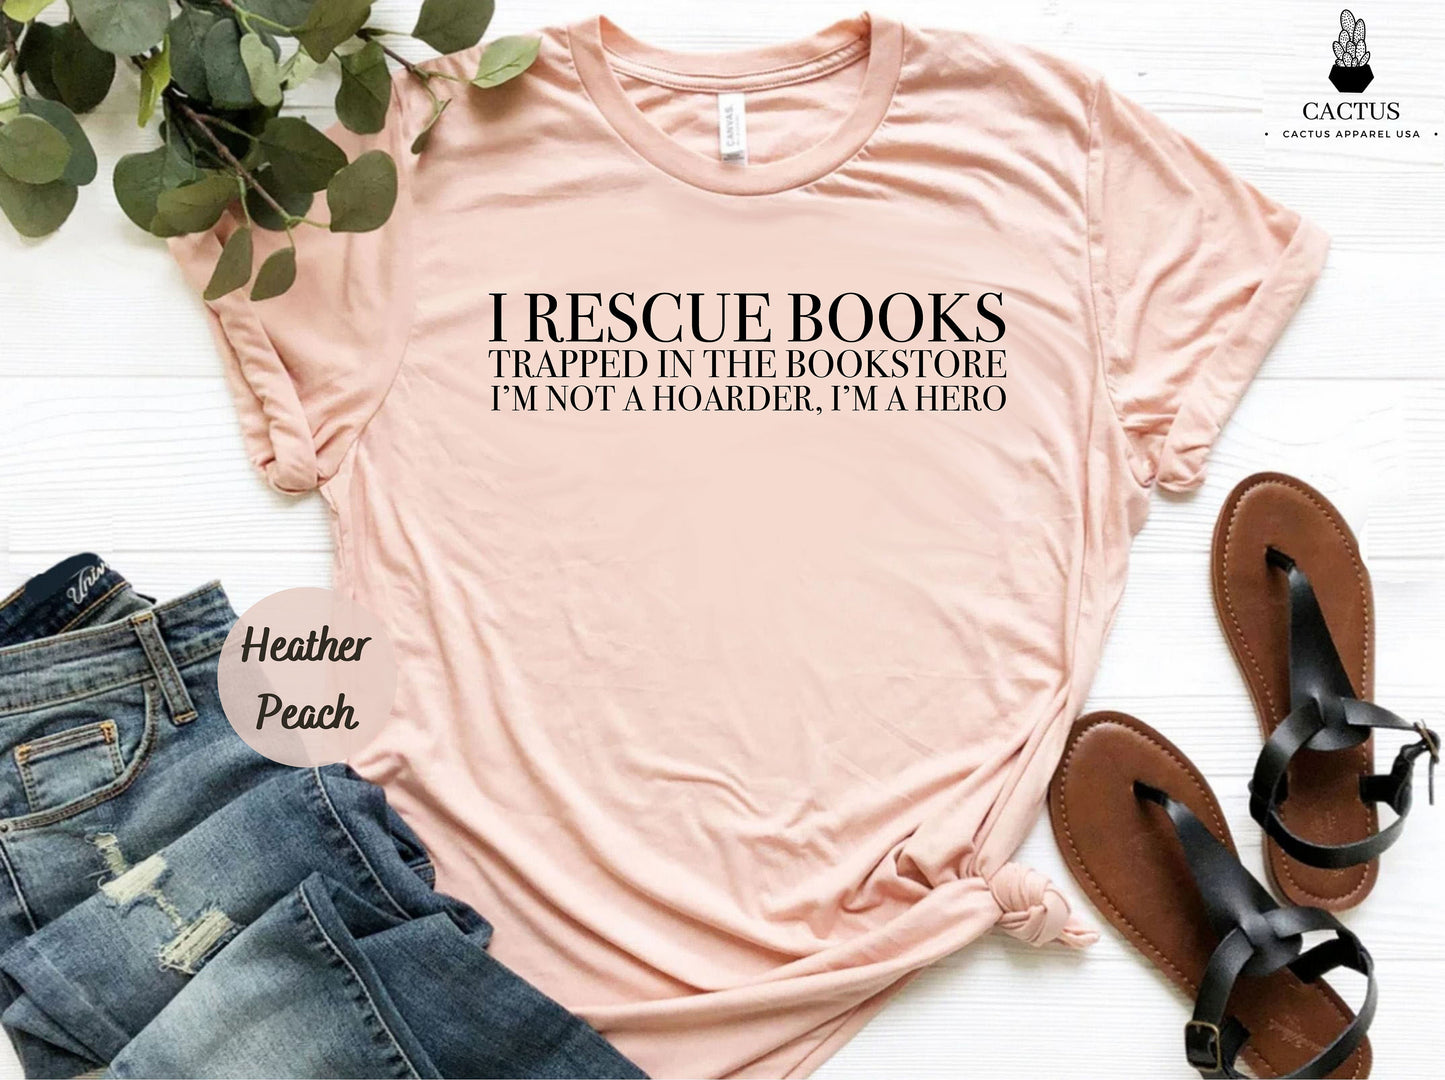 I Rescue Books Shirt, Gift For Bookworms, Booksellers Gift, Gift For Teachers, Readers' T-shirt, I Books Shirt, Funny Shirt, Teacher Shirt